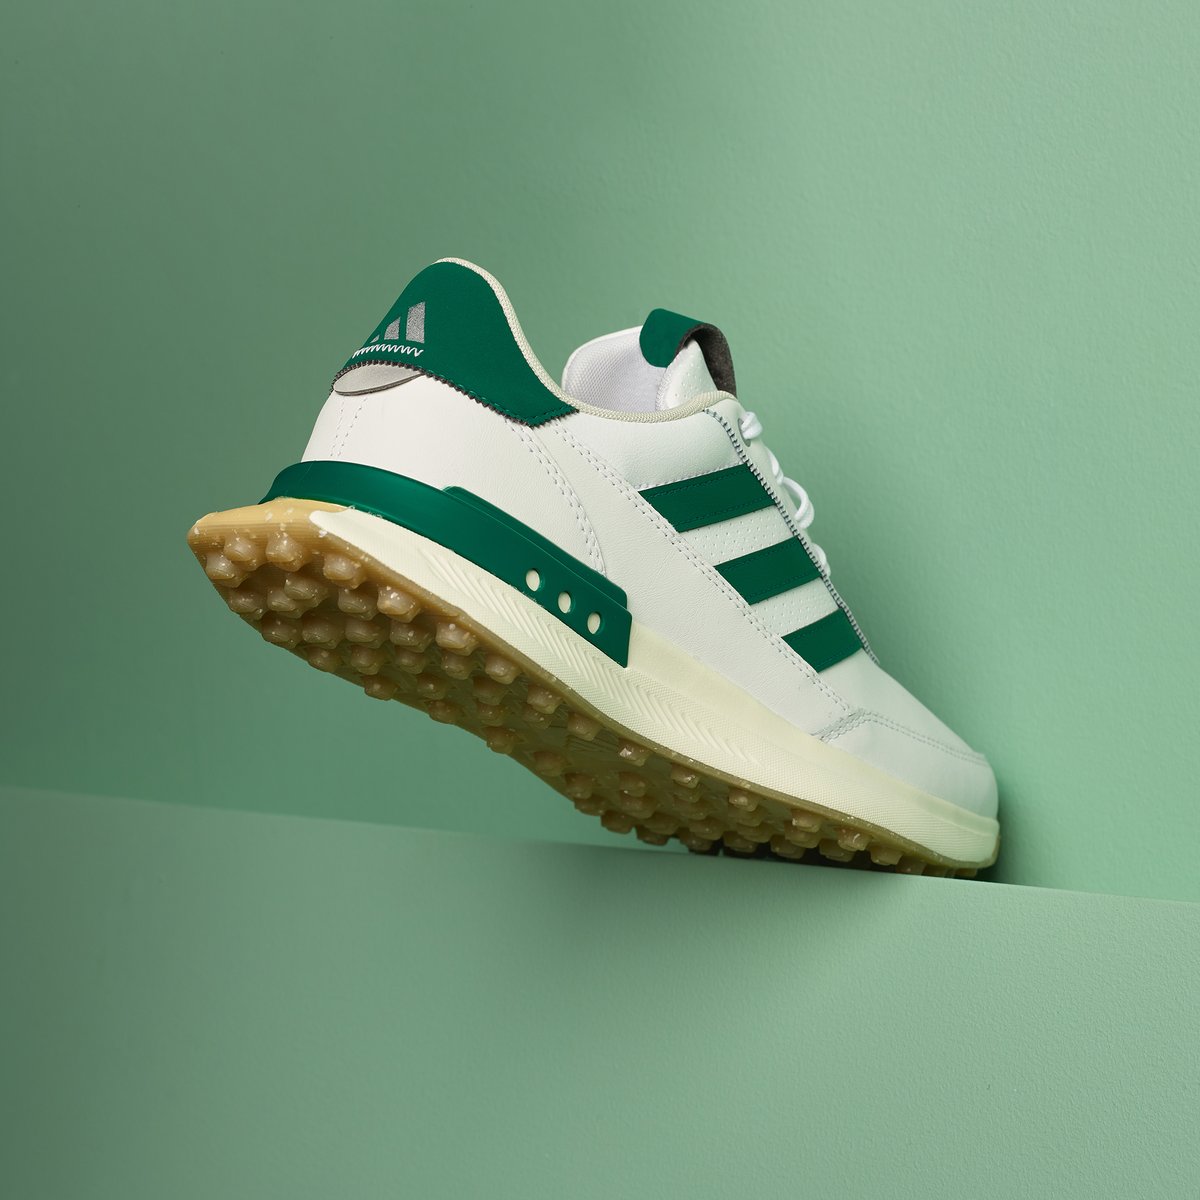 adidas S2G 24 Leather Spikeless #Golf Shoes • White/Collegiate Green/Gum > rb.gy/8cn7jv